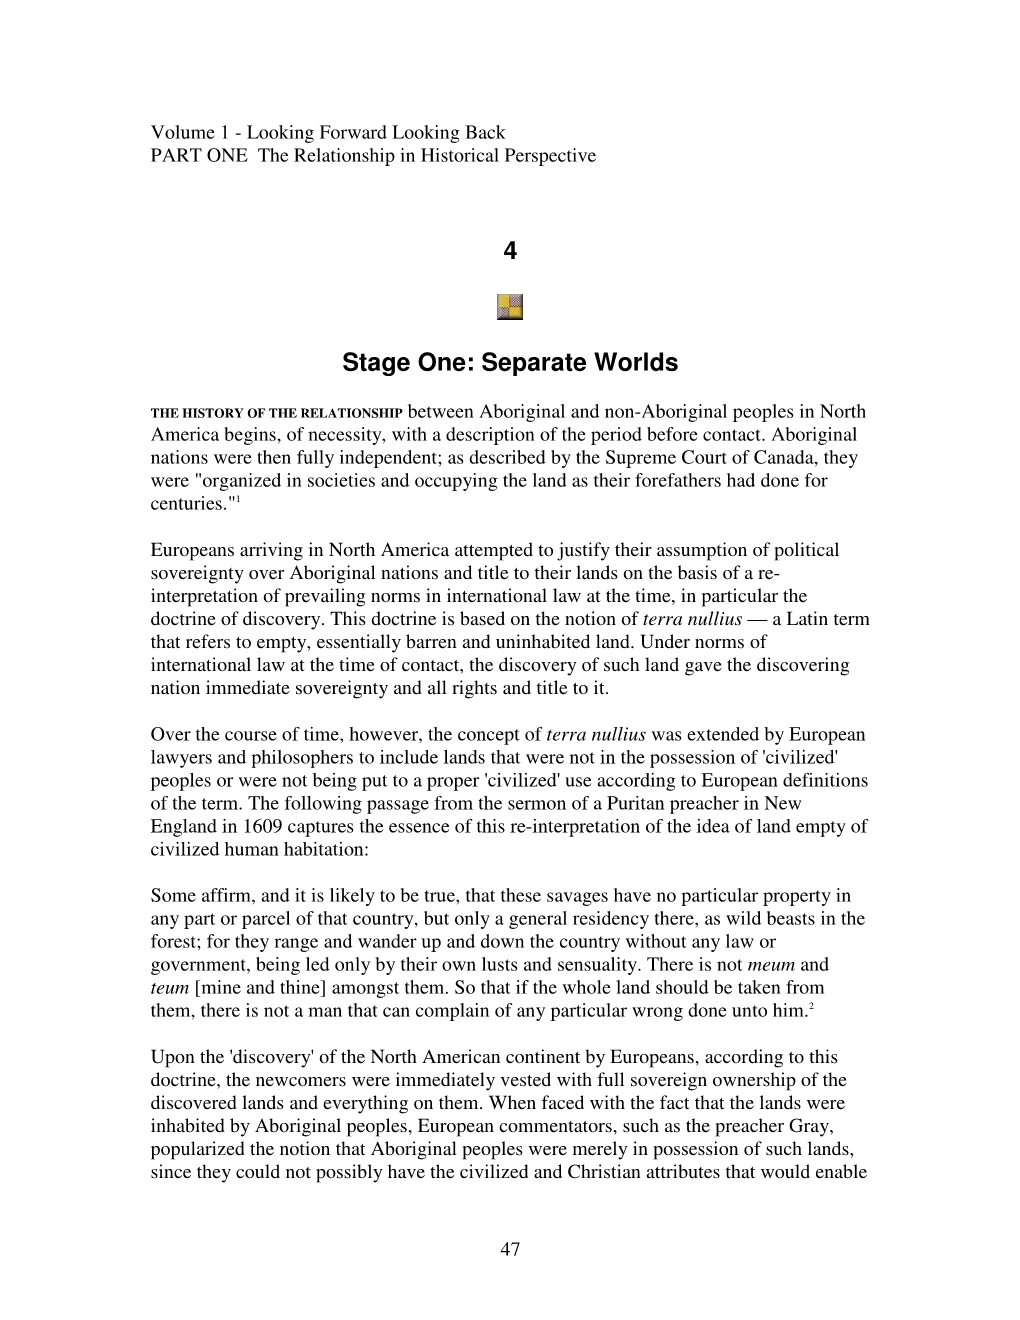 4 Stage One: Separate Worlds